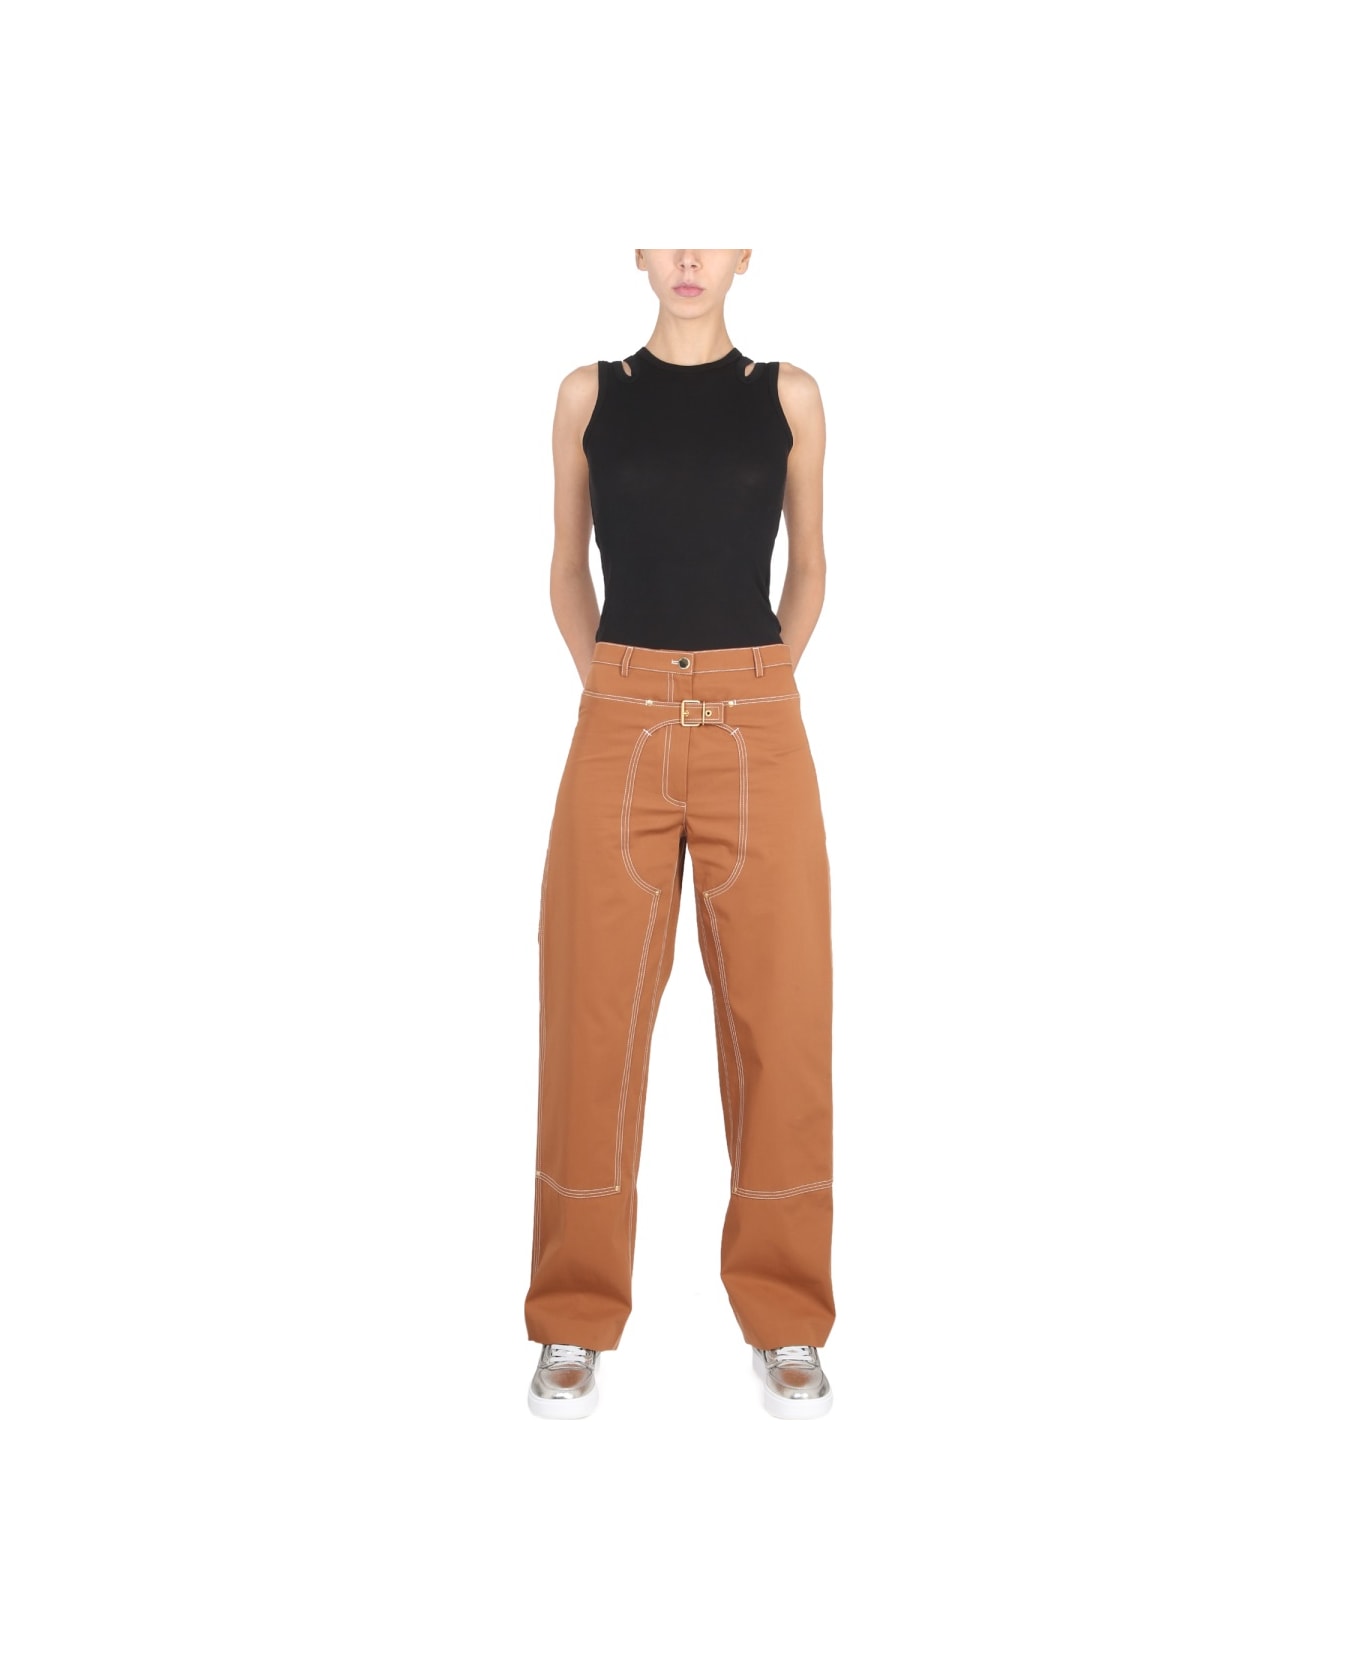 Stella McCartney Pants With Buckle - BROWN